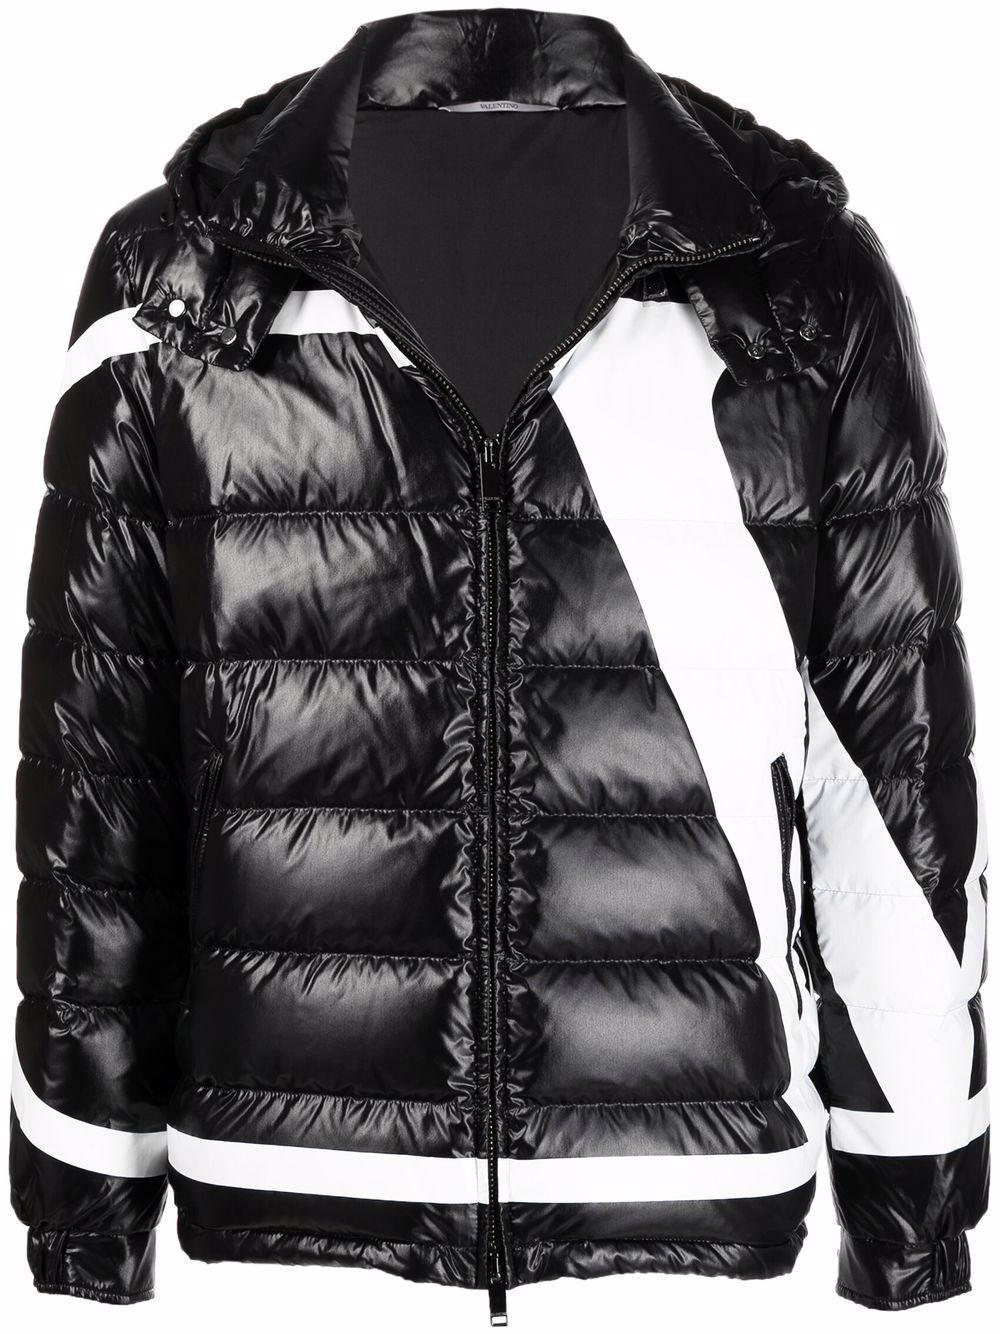 Valentino Printed Puffer Jacket in Nero (Black) for Men - Save 32 